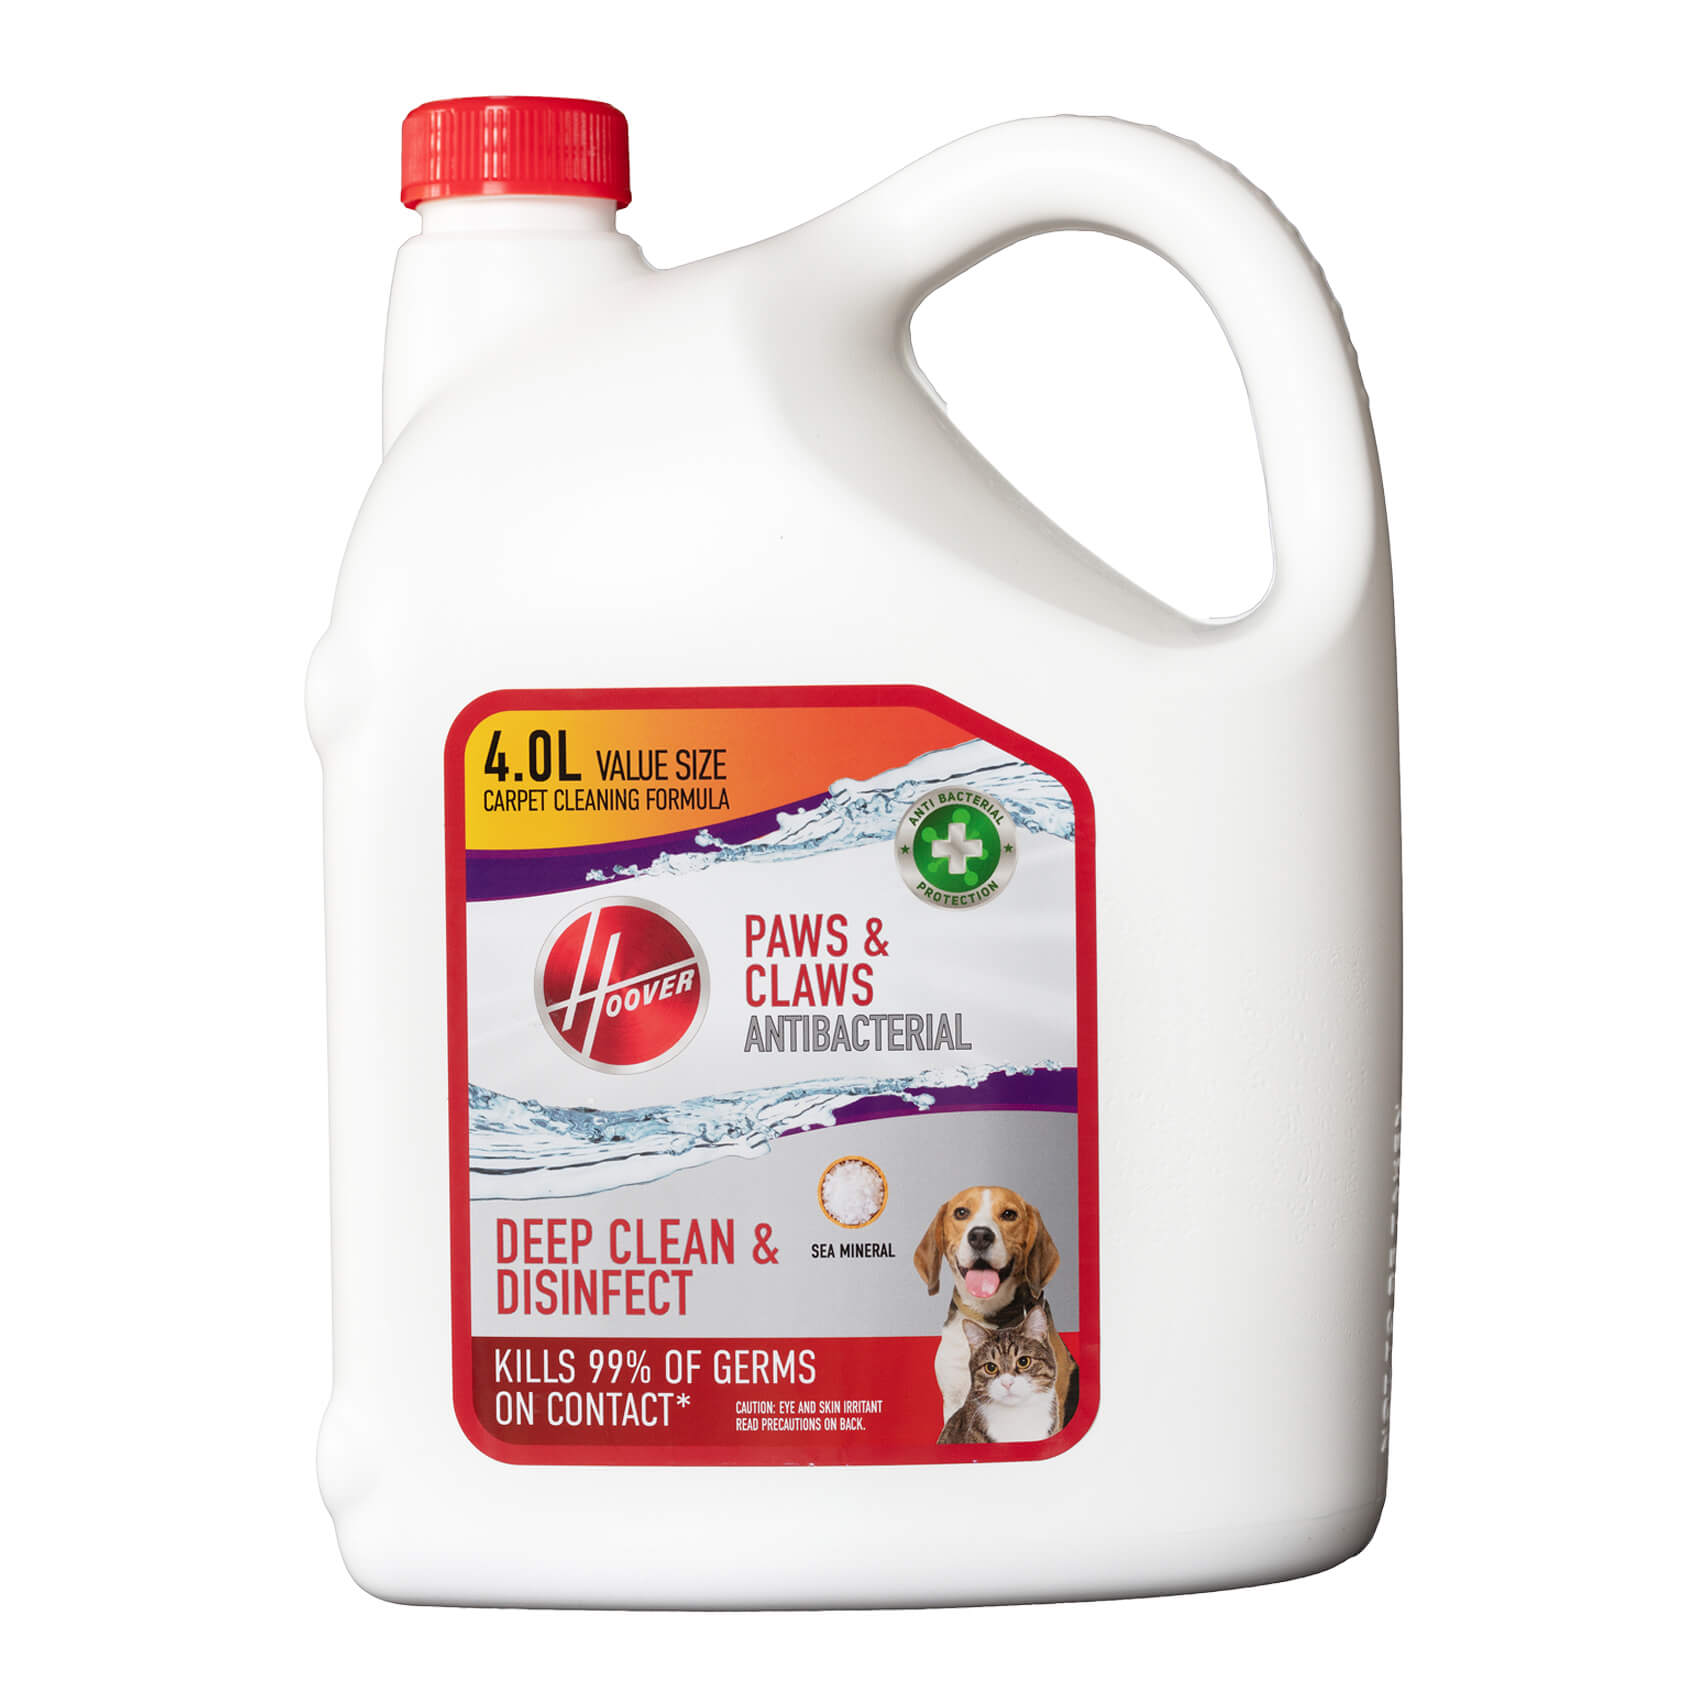 Hoover Paws & Claws Antibacterial Cleaning Solution 4L